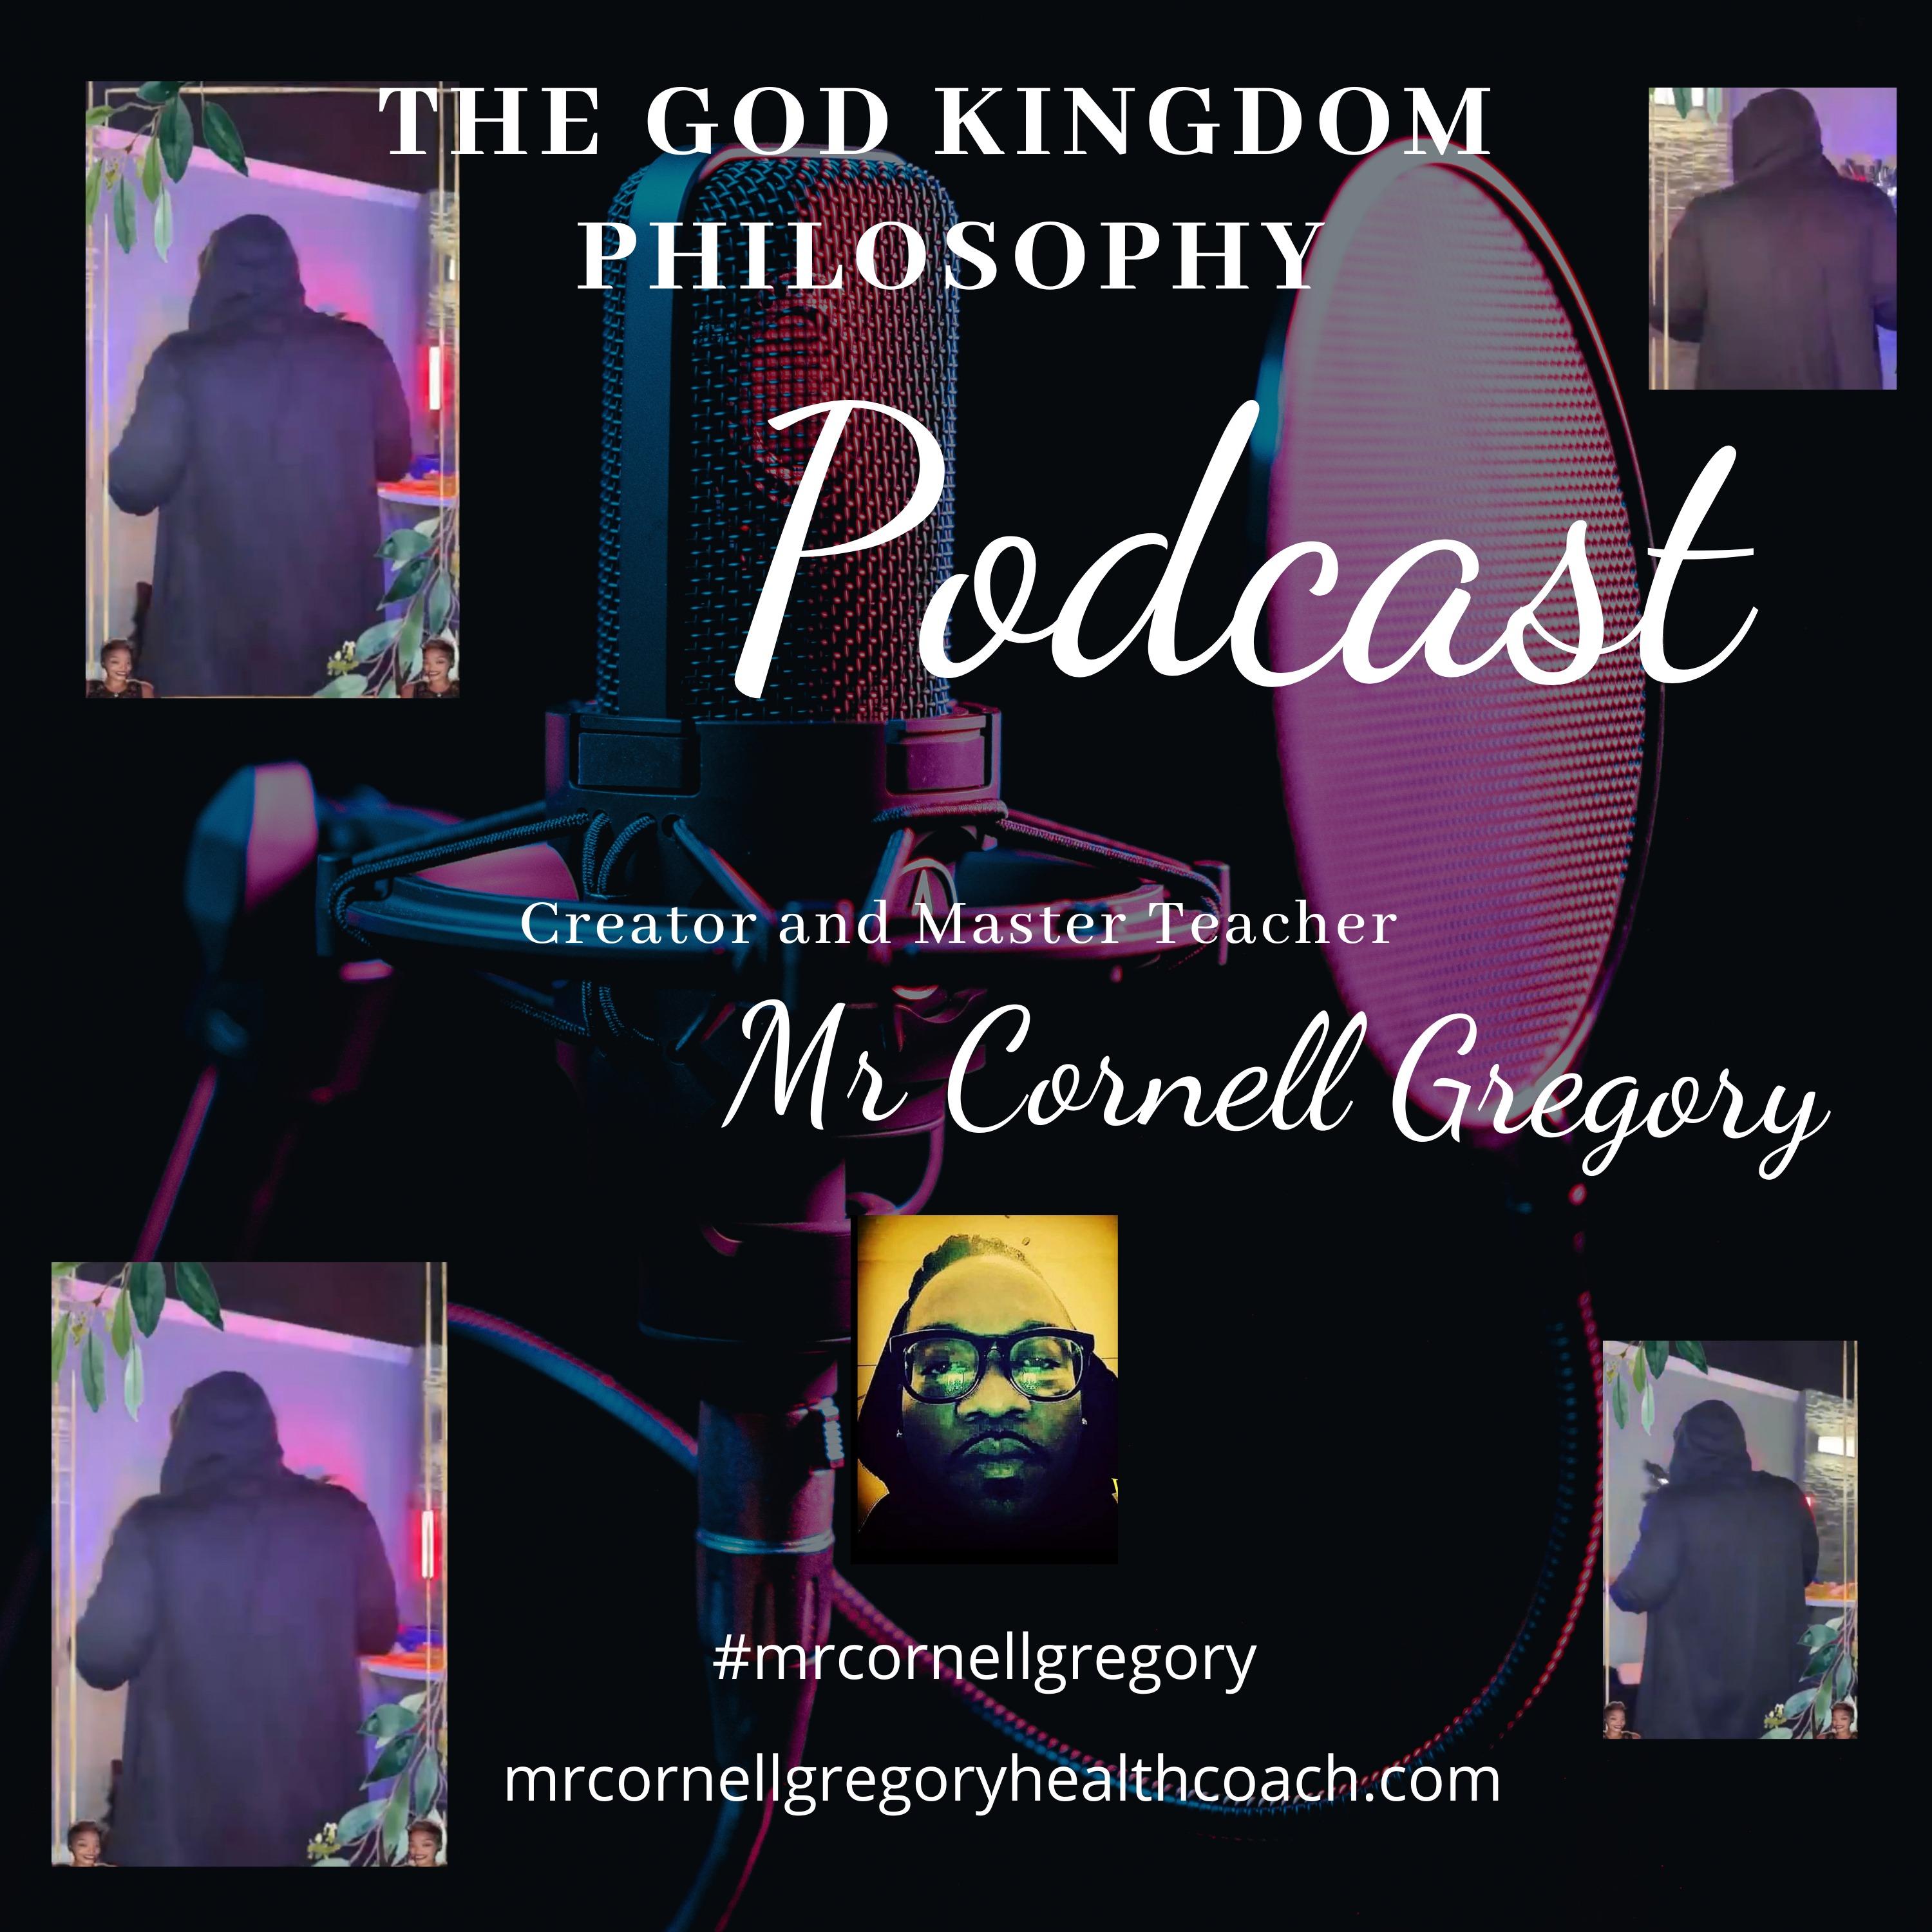 The God-Kingdom Philosophy Podcast with Creator and Master teacher Mr Cornell Gregory